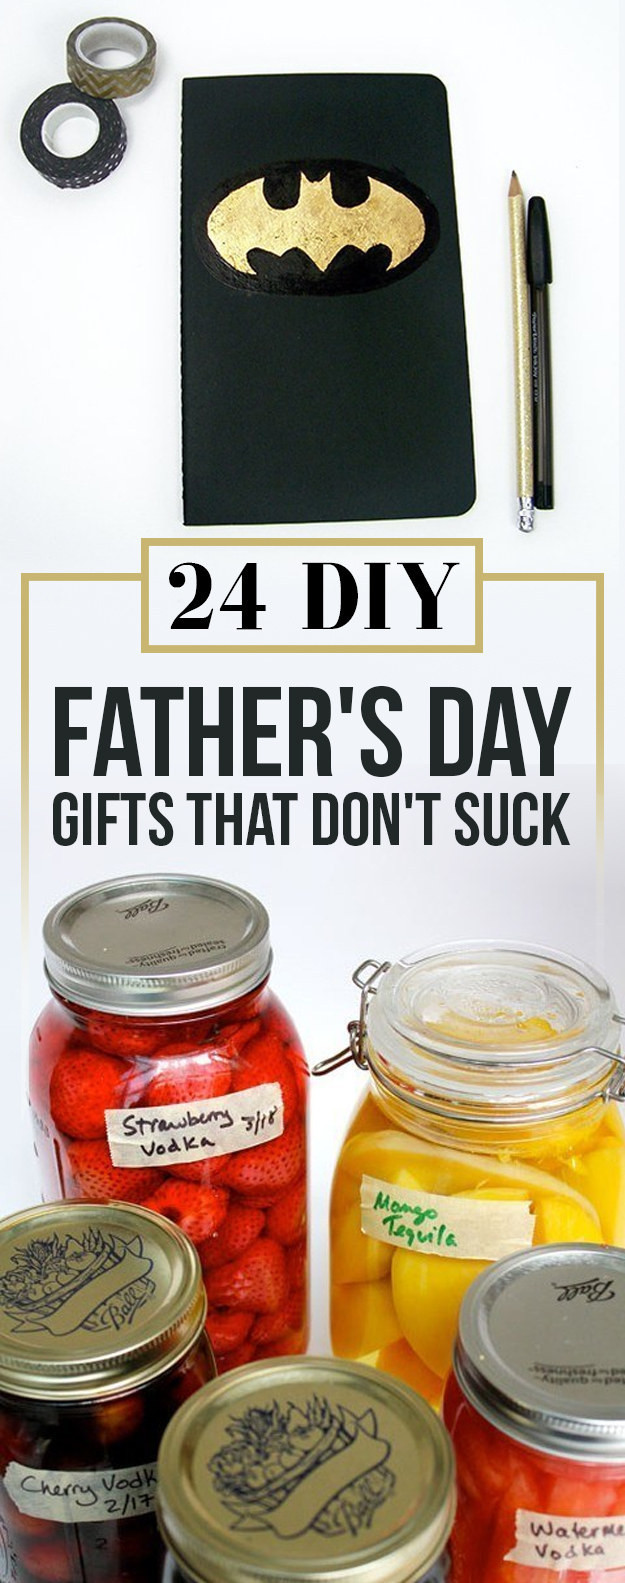 Buzzfeed DIY Gifts
 24 DIY Father s Day Gifts He ll Actually Want